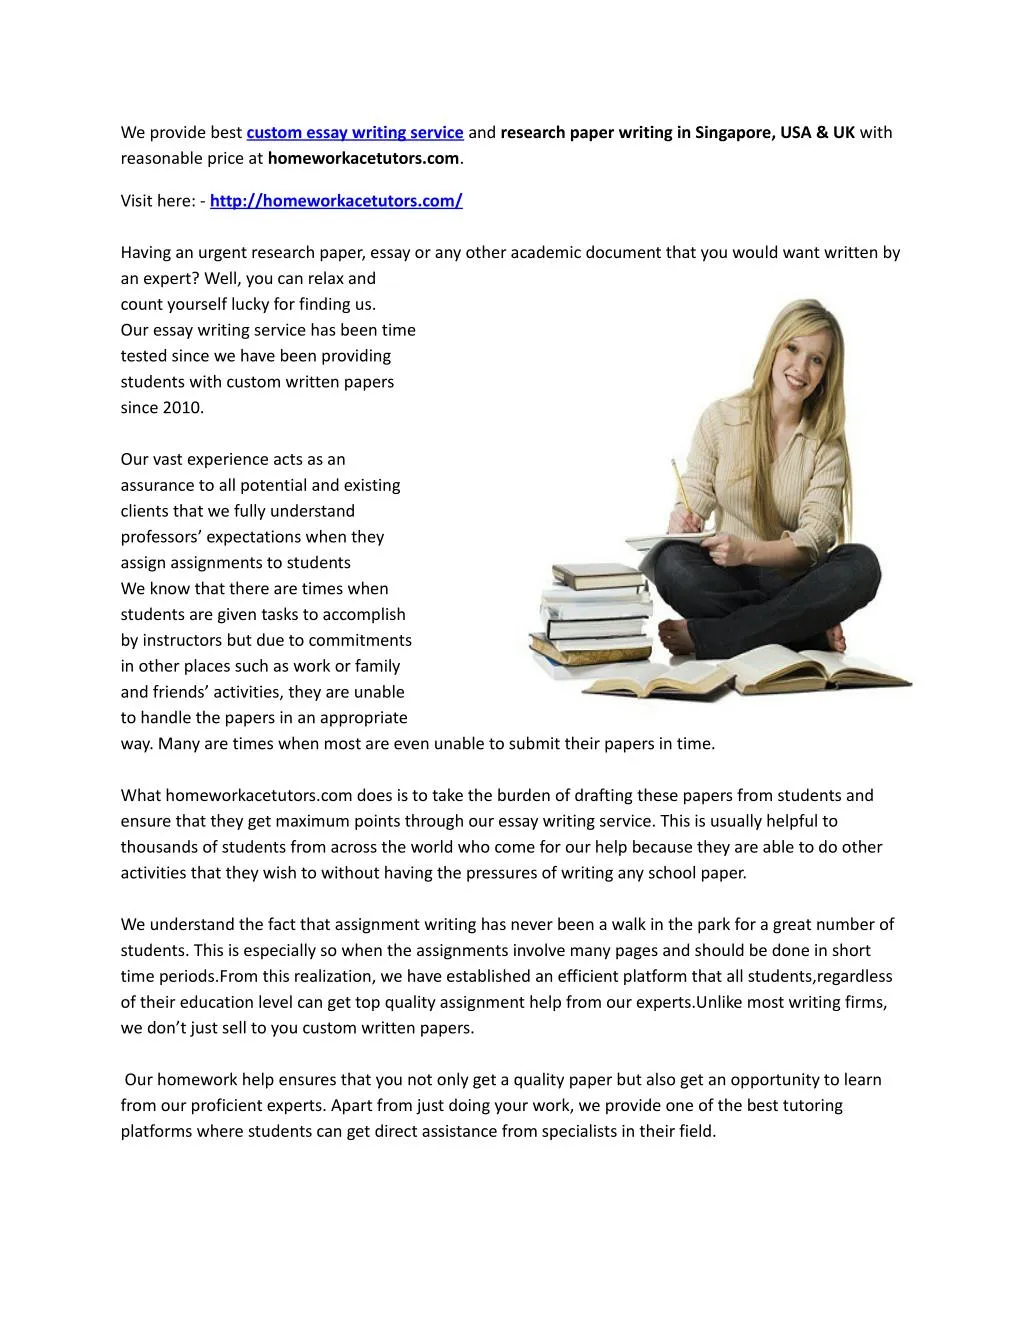 Dissertation writing services in singapore will